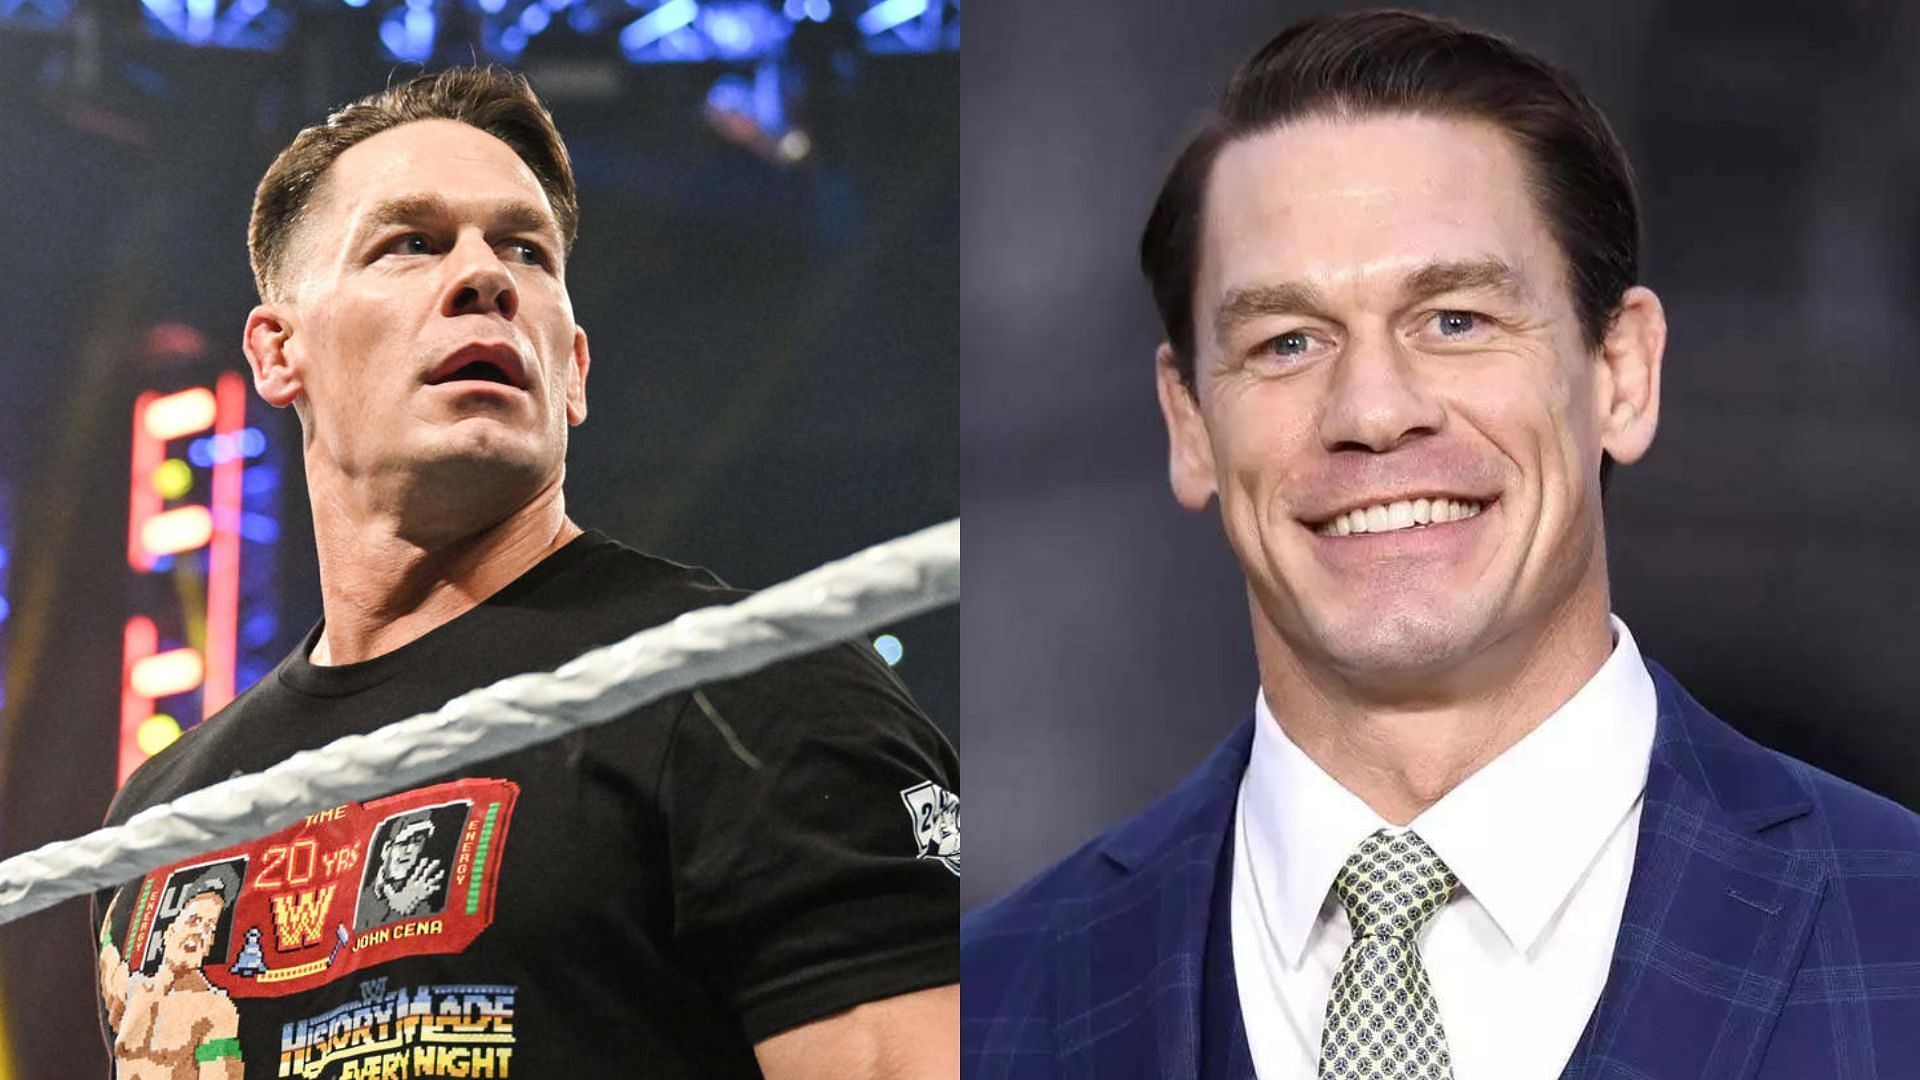 John Cena is set to battle Austin Theory at this year